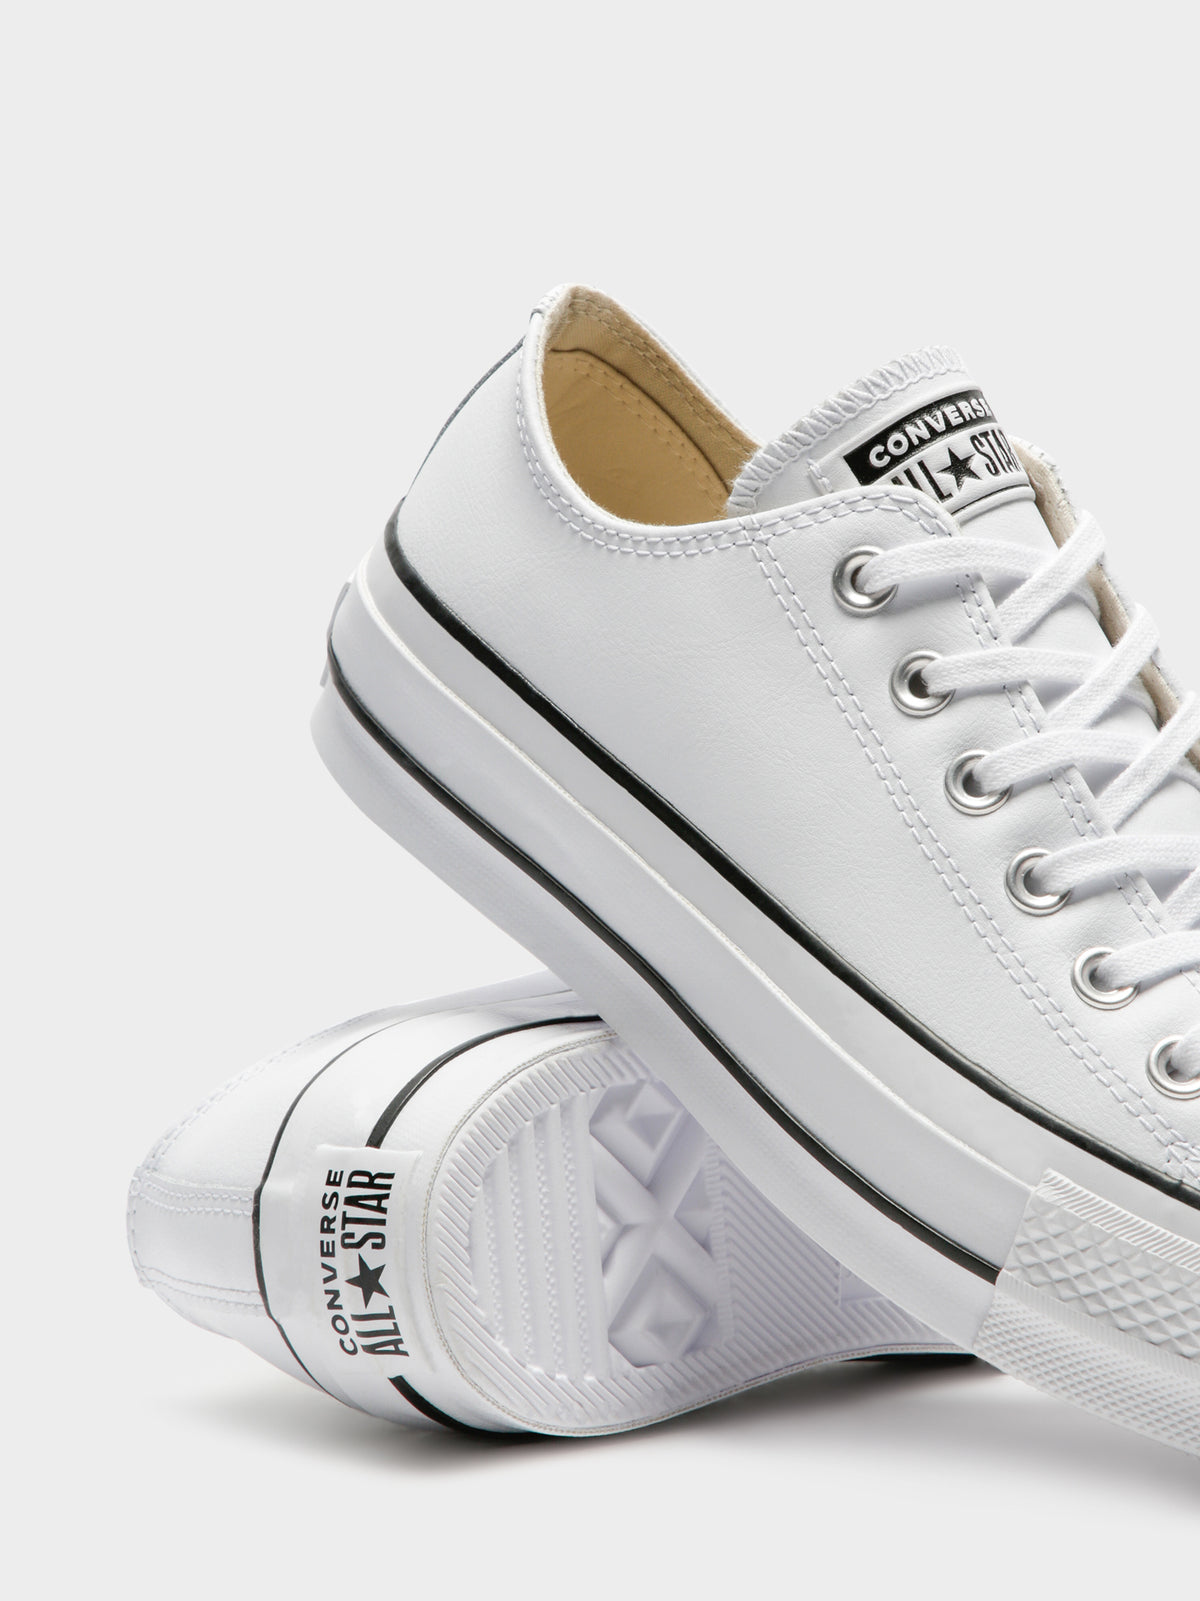 converse all star womens white leather